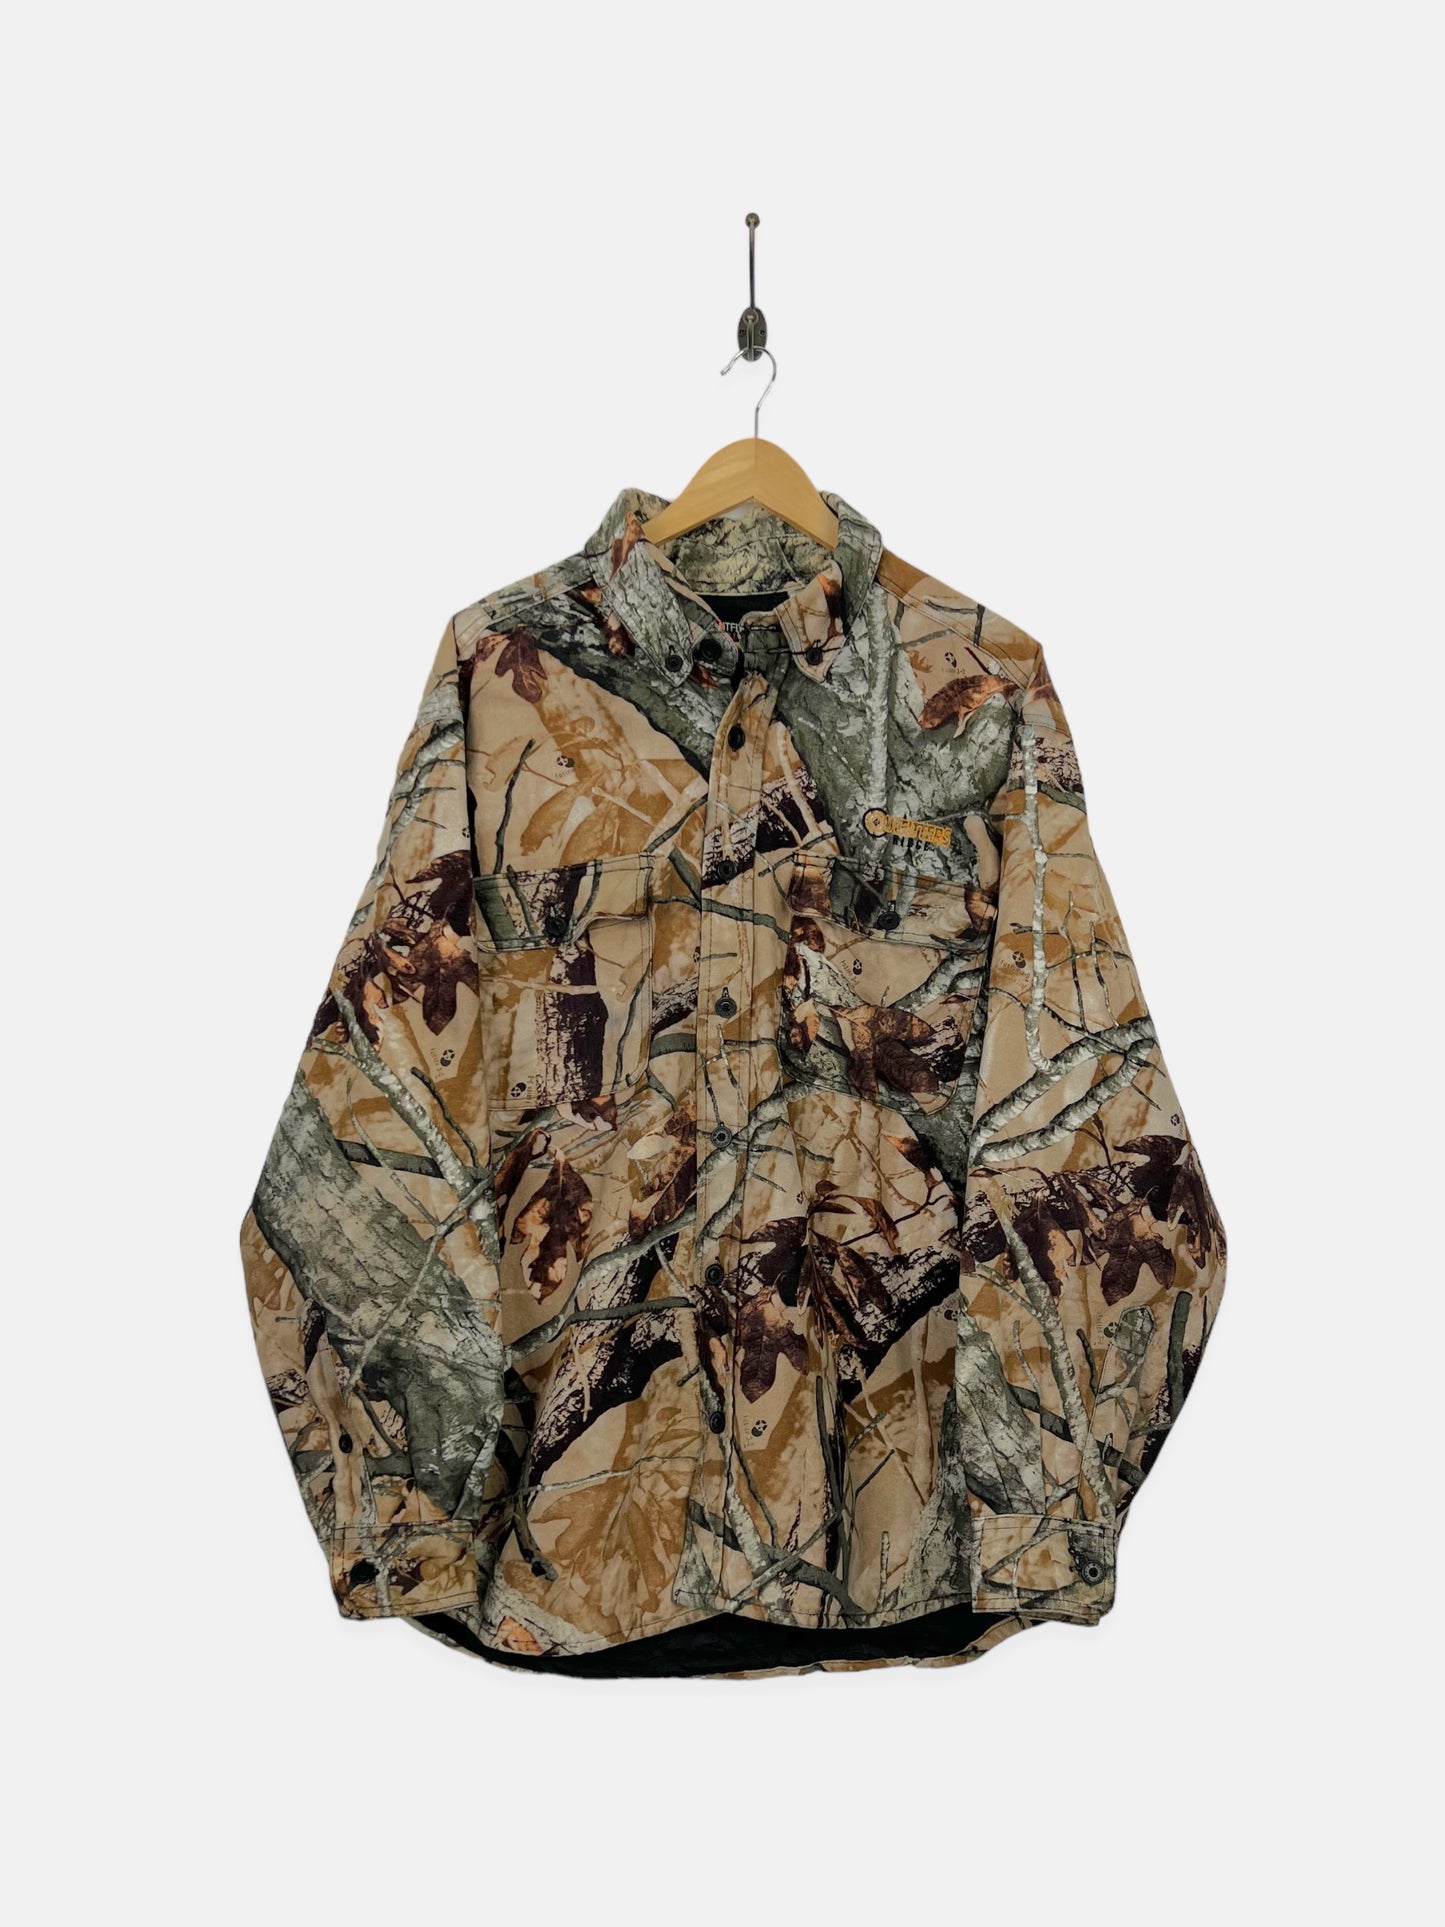 90's Realtree Camo Embroidered Vintage Jacket Size XL